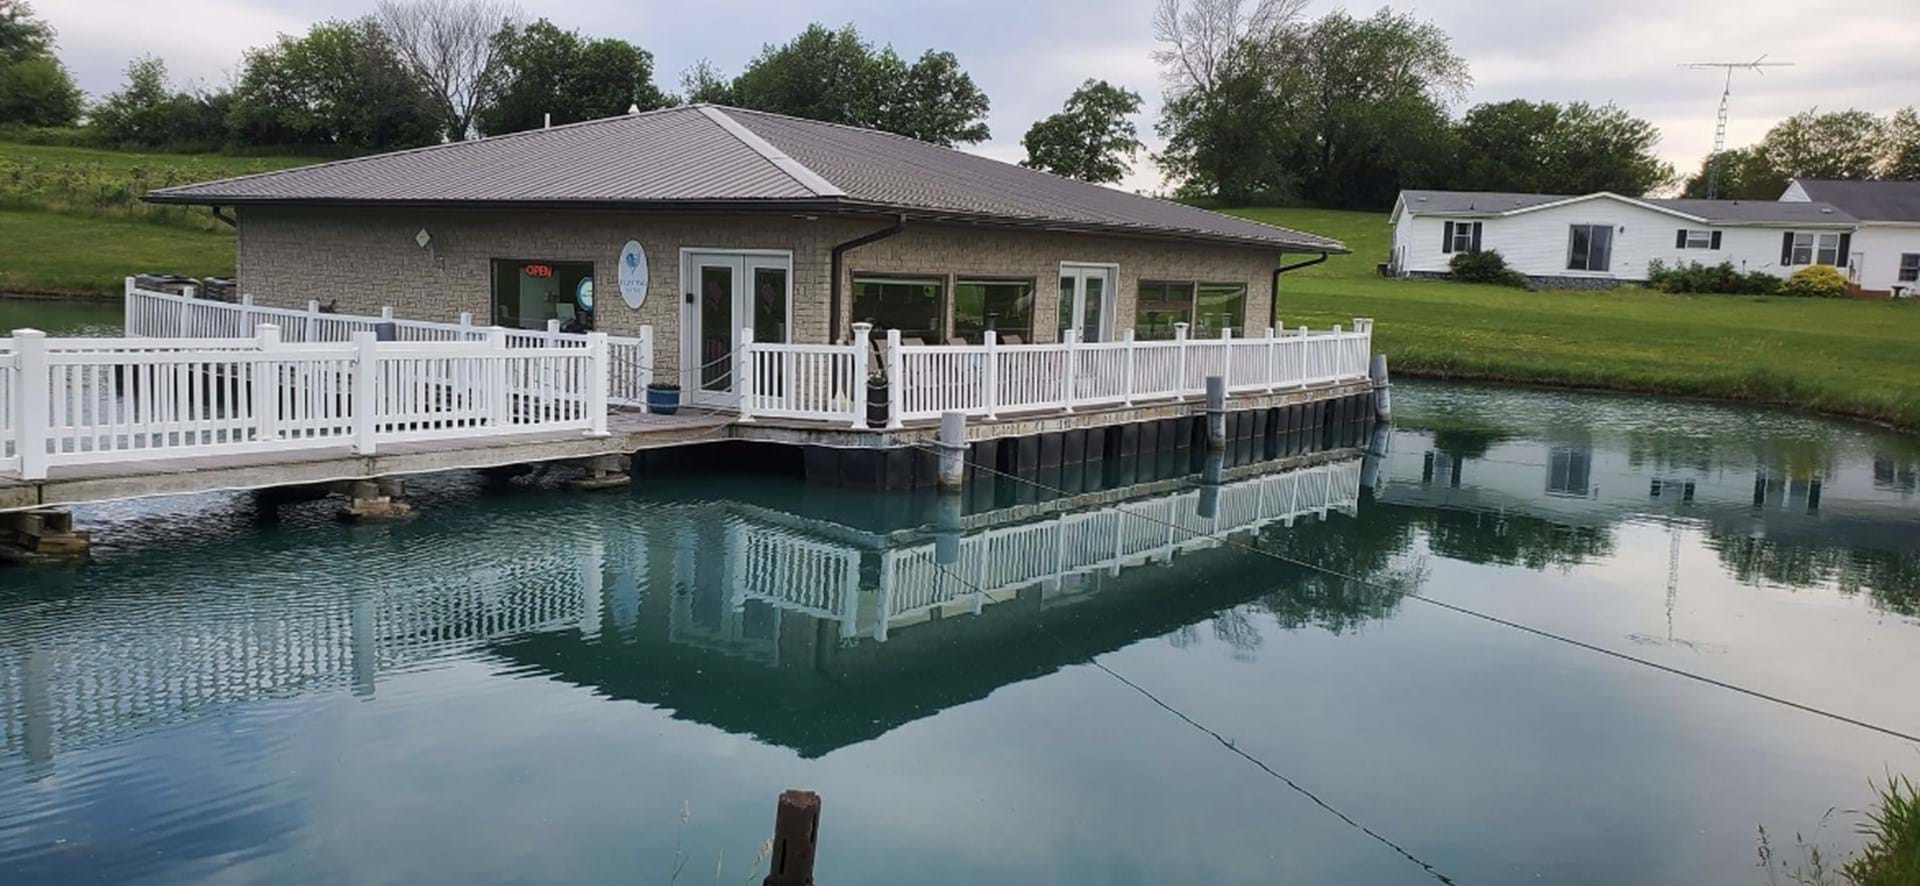 Only floating winery in Iowa